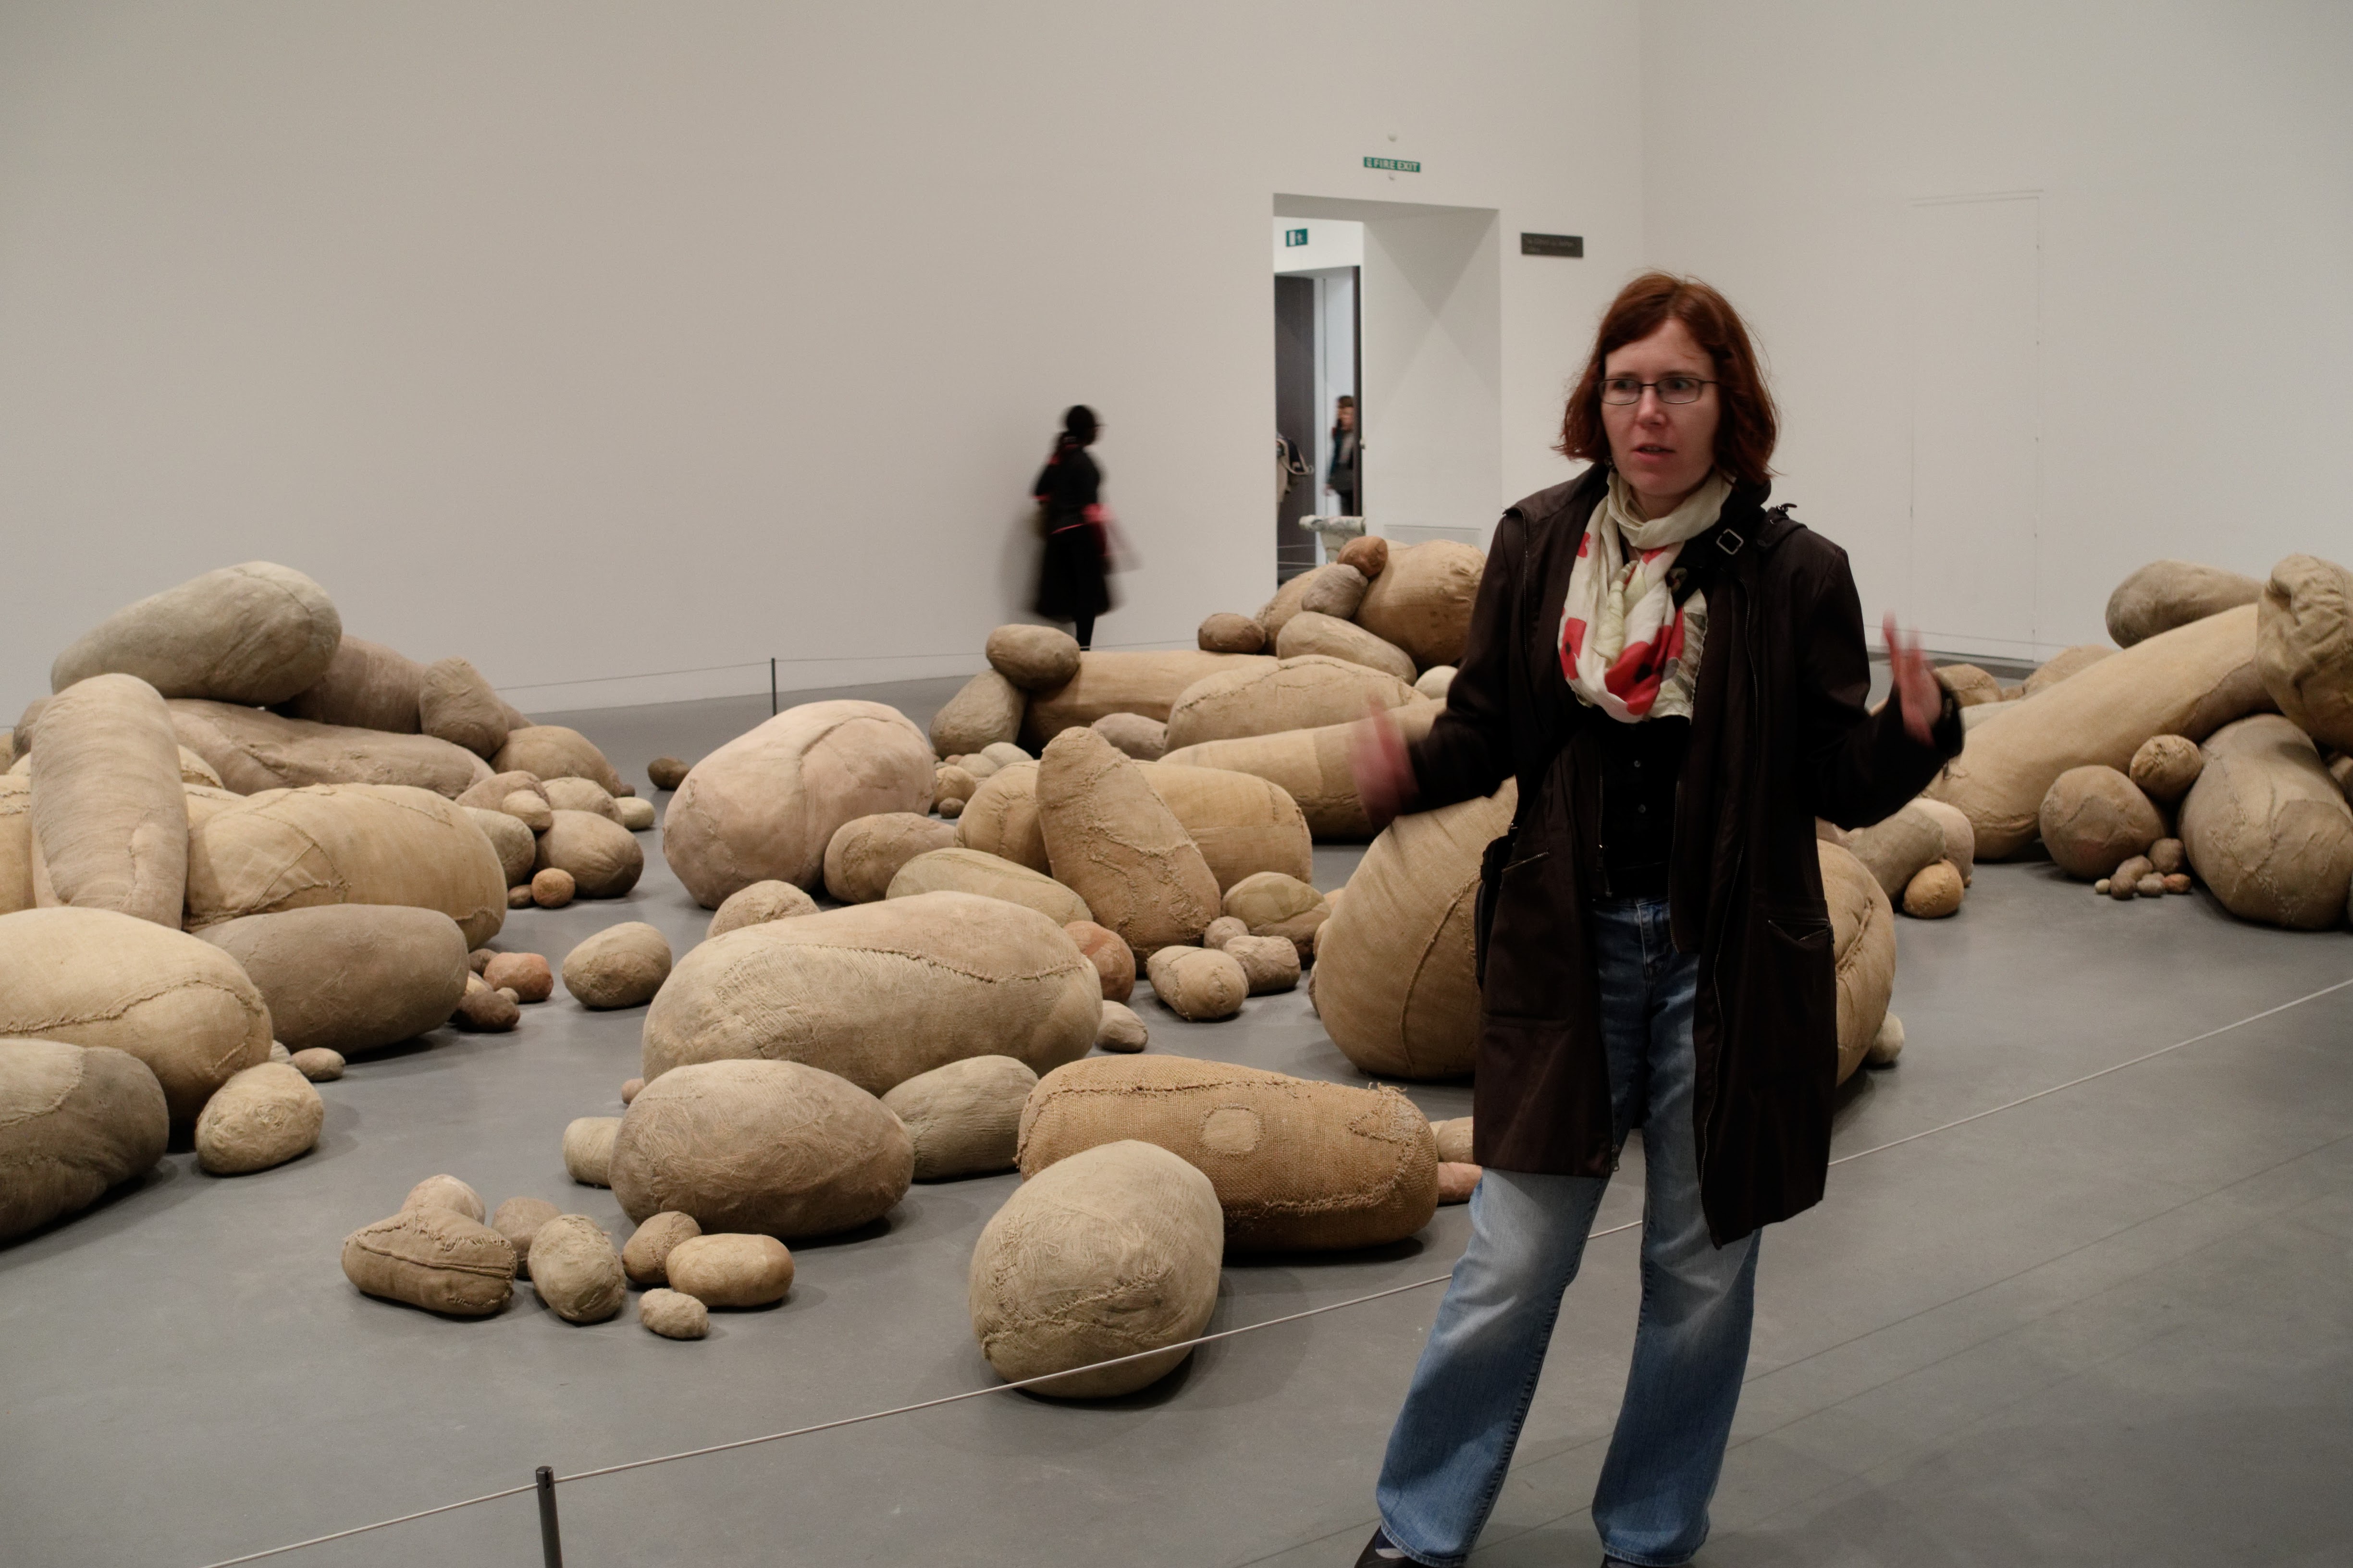 Author gesticulating in front of Embryology by Magdalena Abakanowicz at Tate Modern